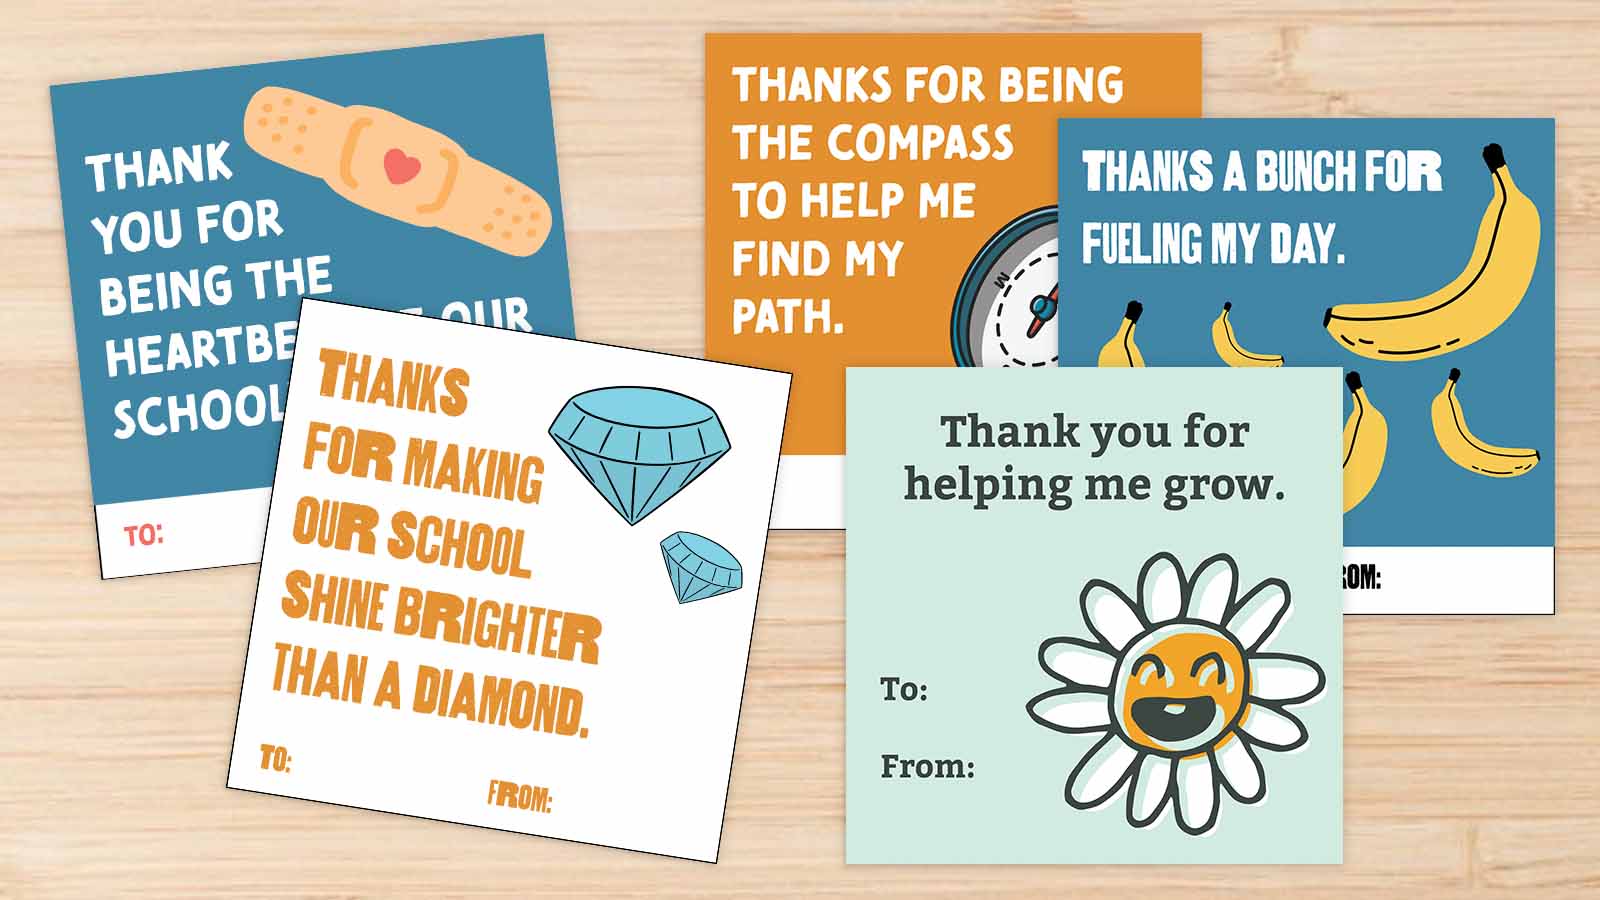 Examples of five different thank you cards for school staff members like nurses, custodians, paraprofessionals, and more.